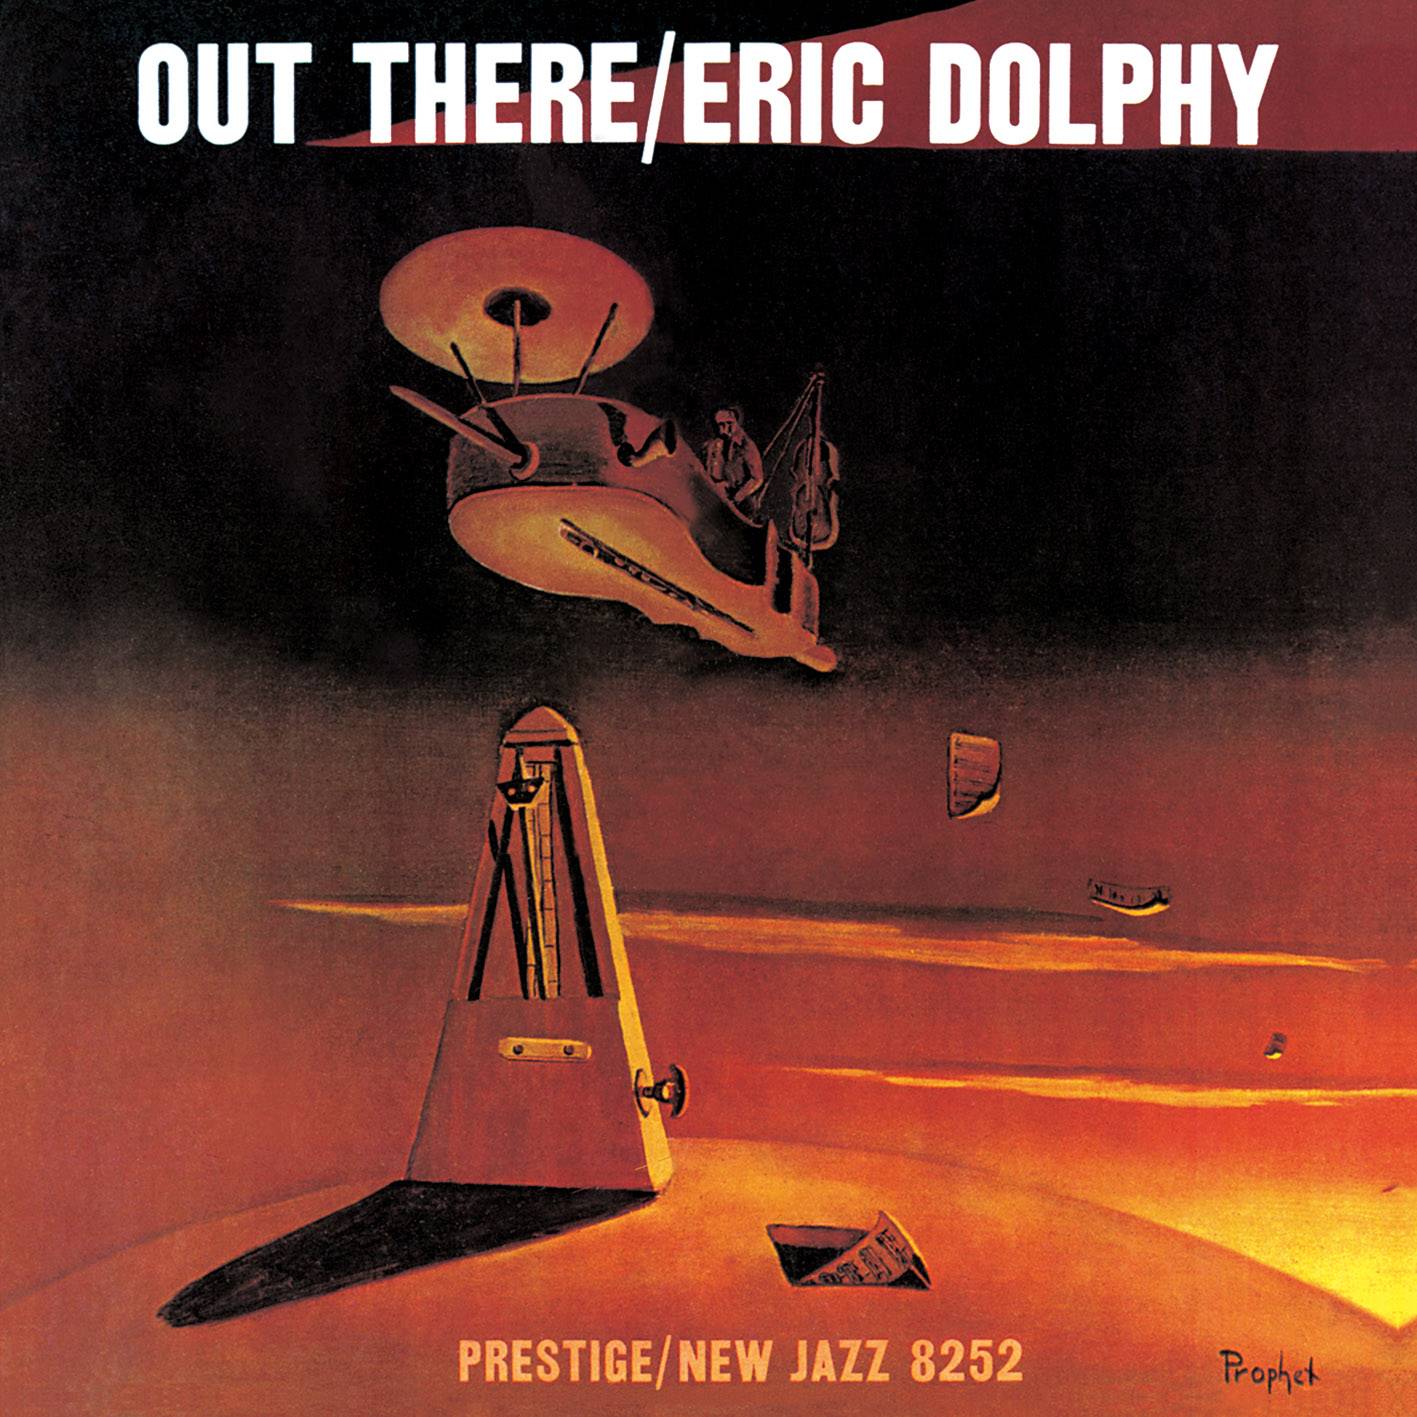 Eric Dolphy – Out There (1960) [Reissue 2003] SACD ISO + Hi-Res FLAC